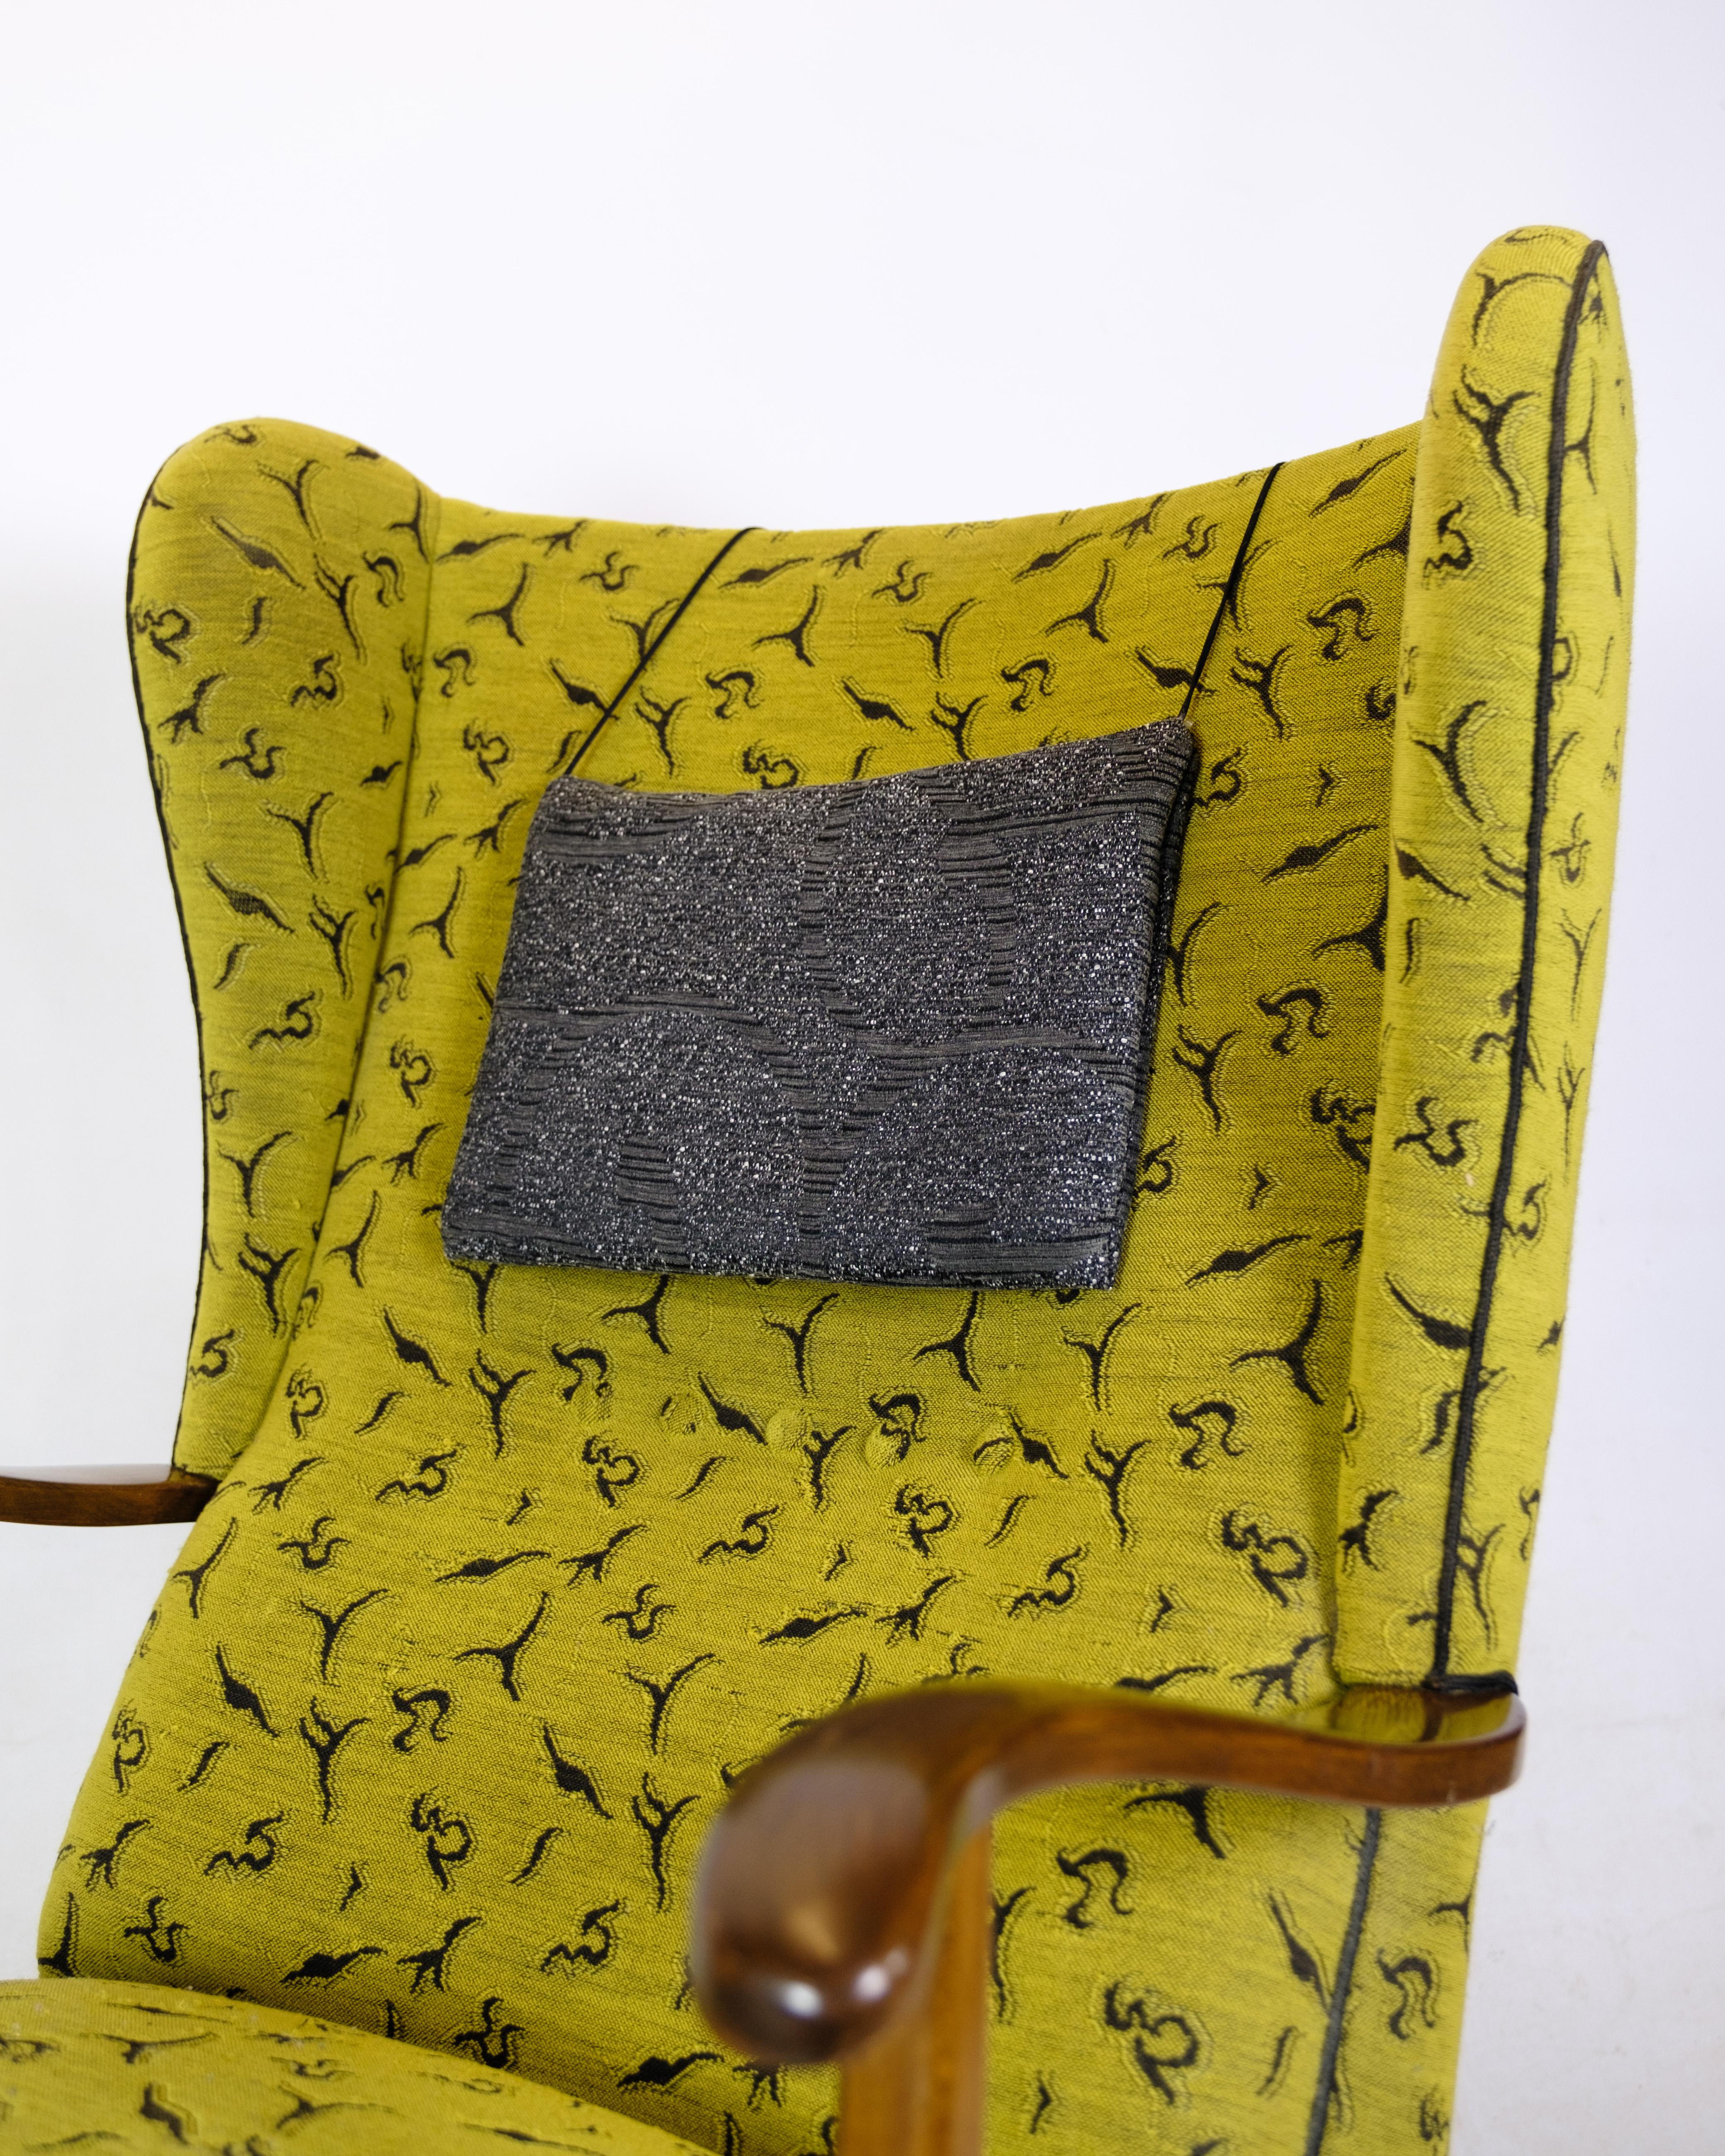 Armchair by a Danish master carpenter in dark polished wood upholstered in gray and yellow patterned fabric from around the 1940s.
Measurements in cm: H:103 W:65 D:85/52 SH:41